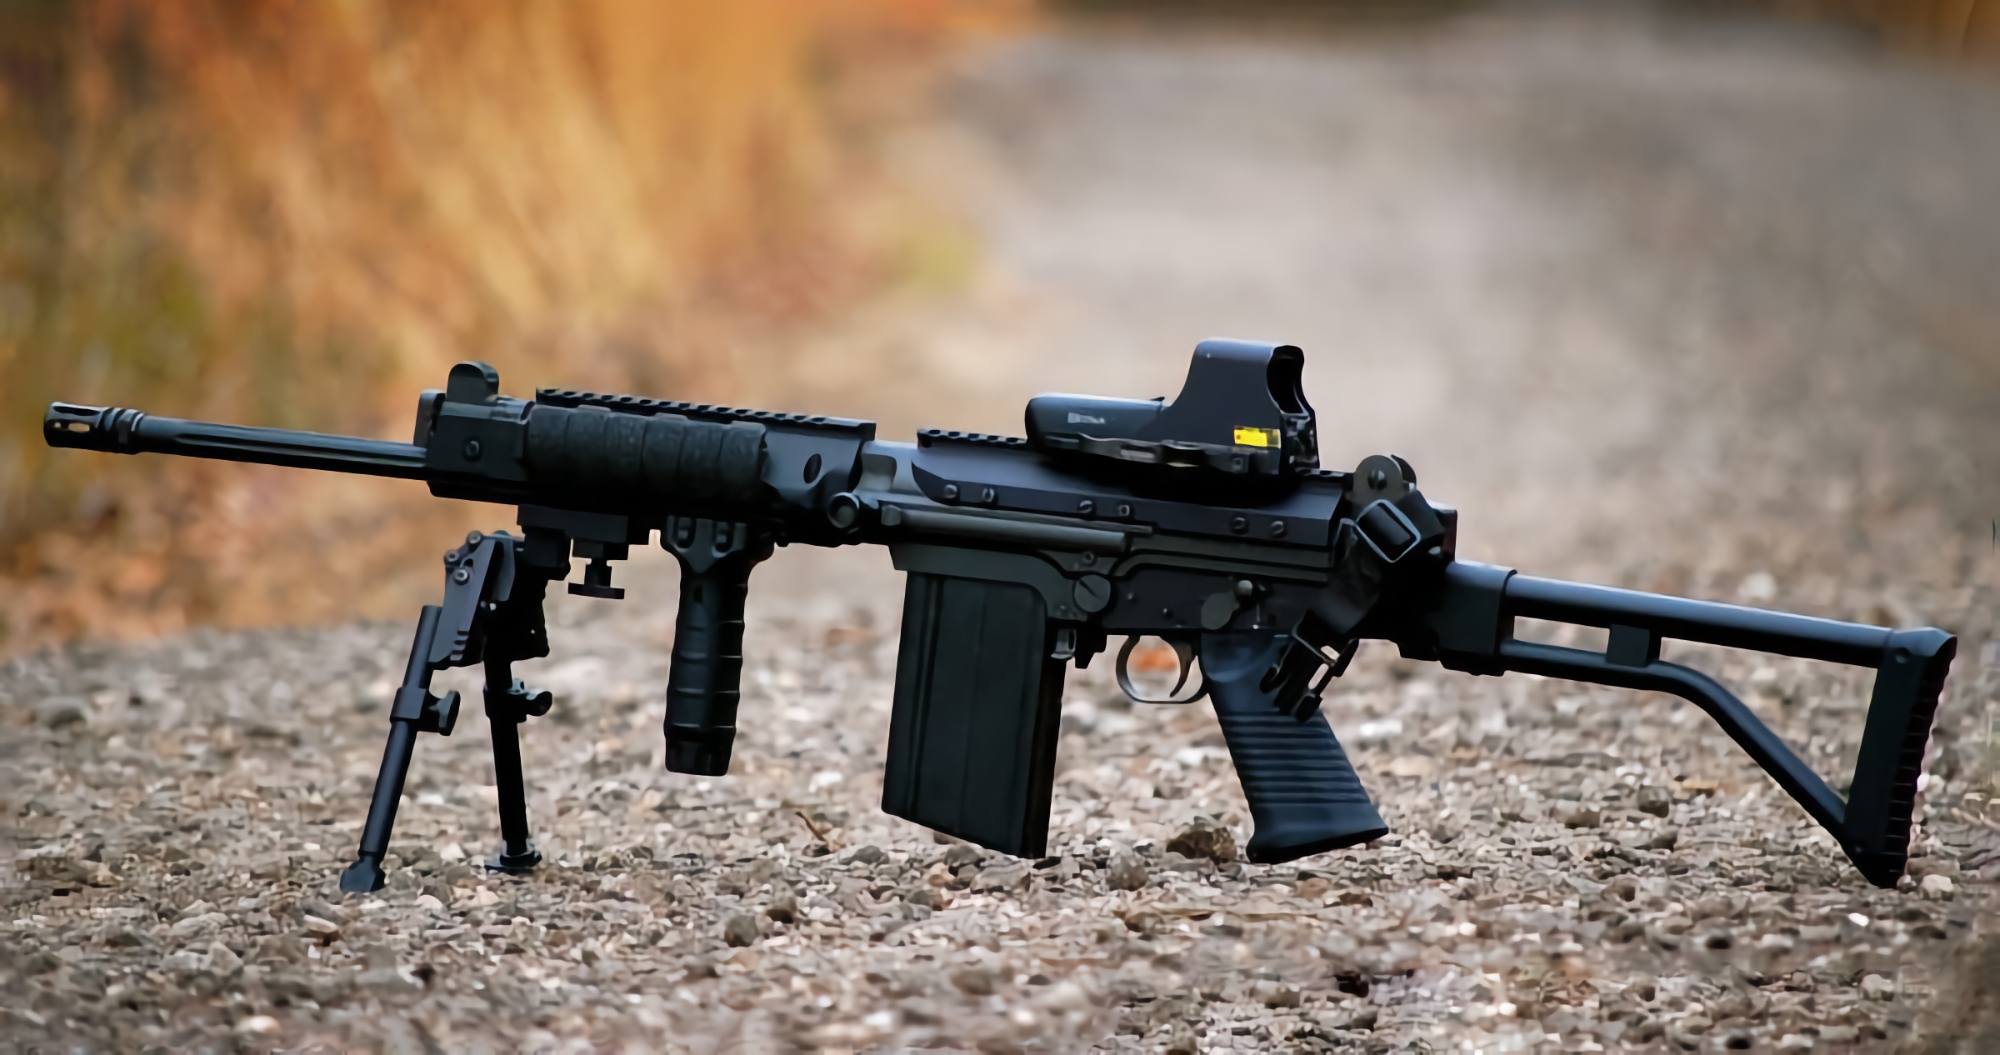 Ukrainian soldiers began to use FN FAL automatic rifles, one of the most famous and widespread weapons in the world